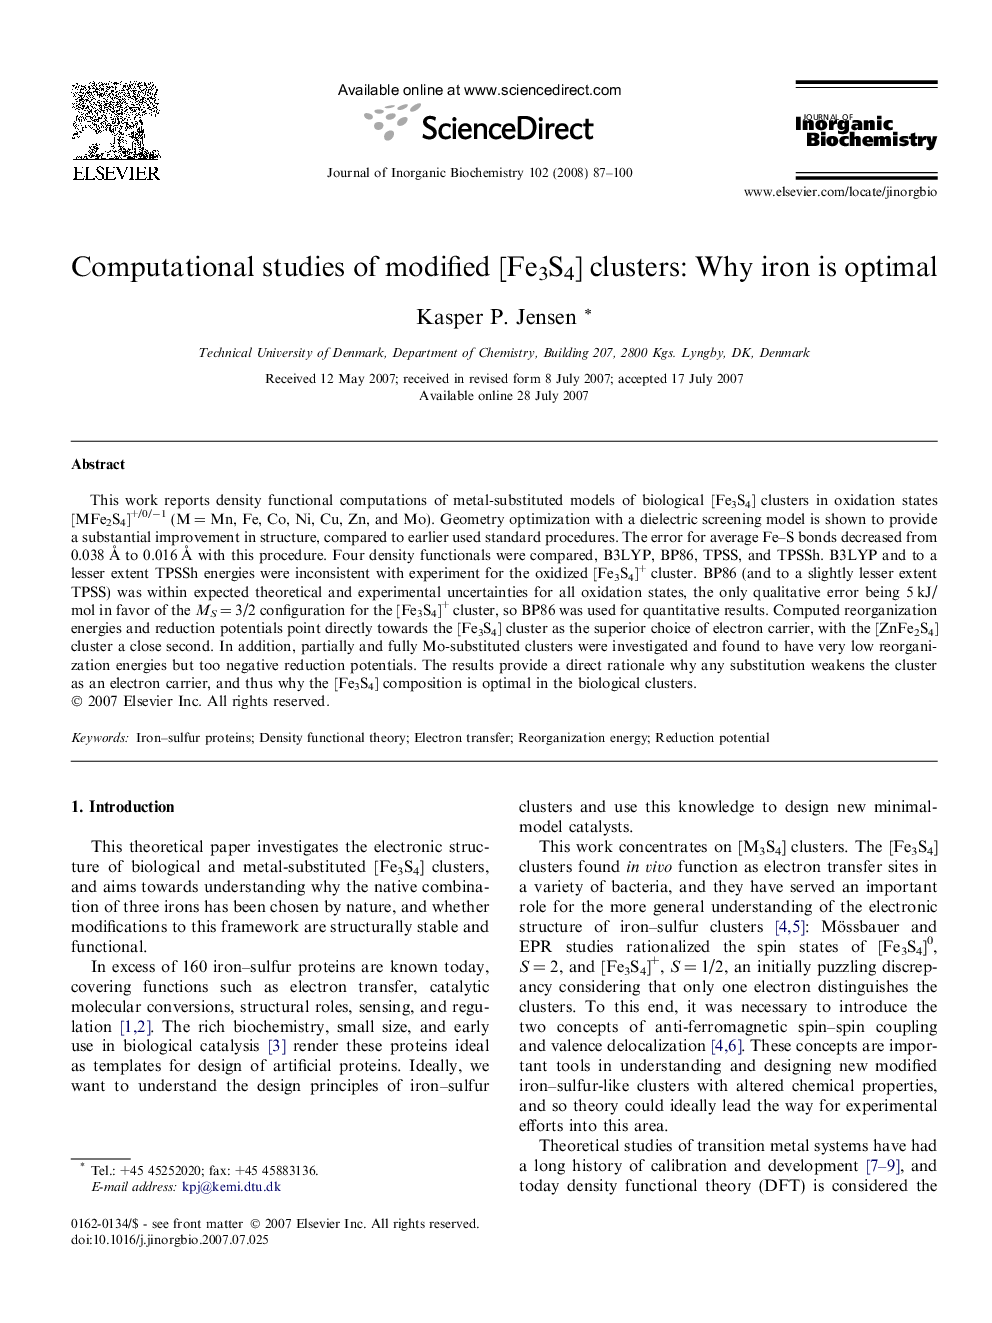 Computational studies of modified [Fe3S4] clusters: Why iron is optimal